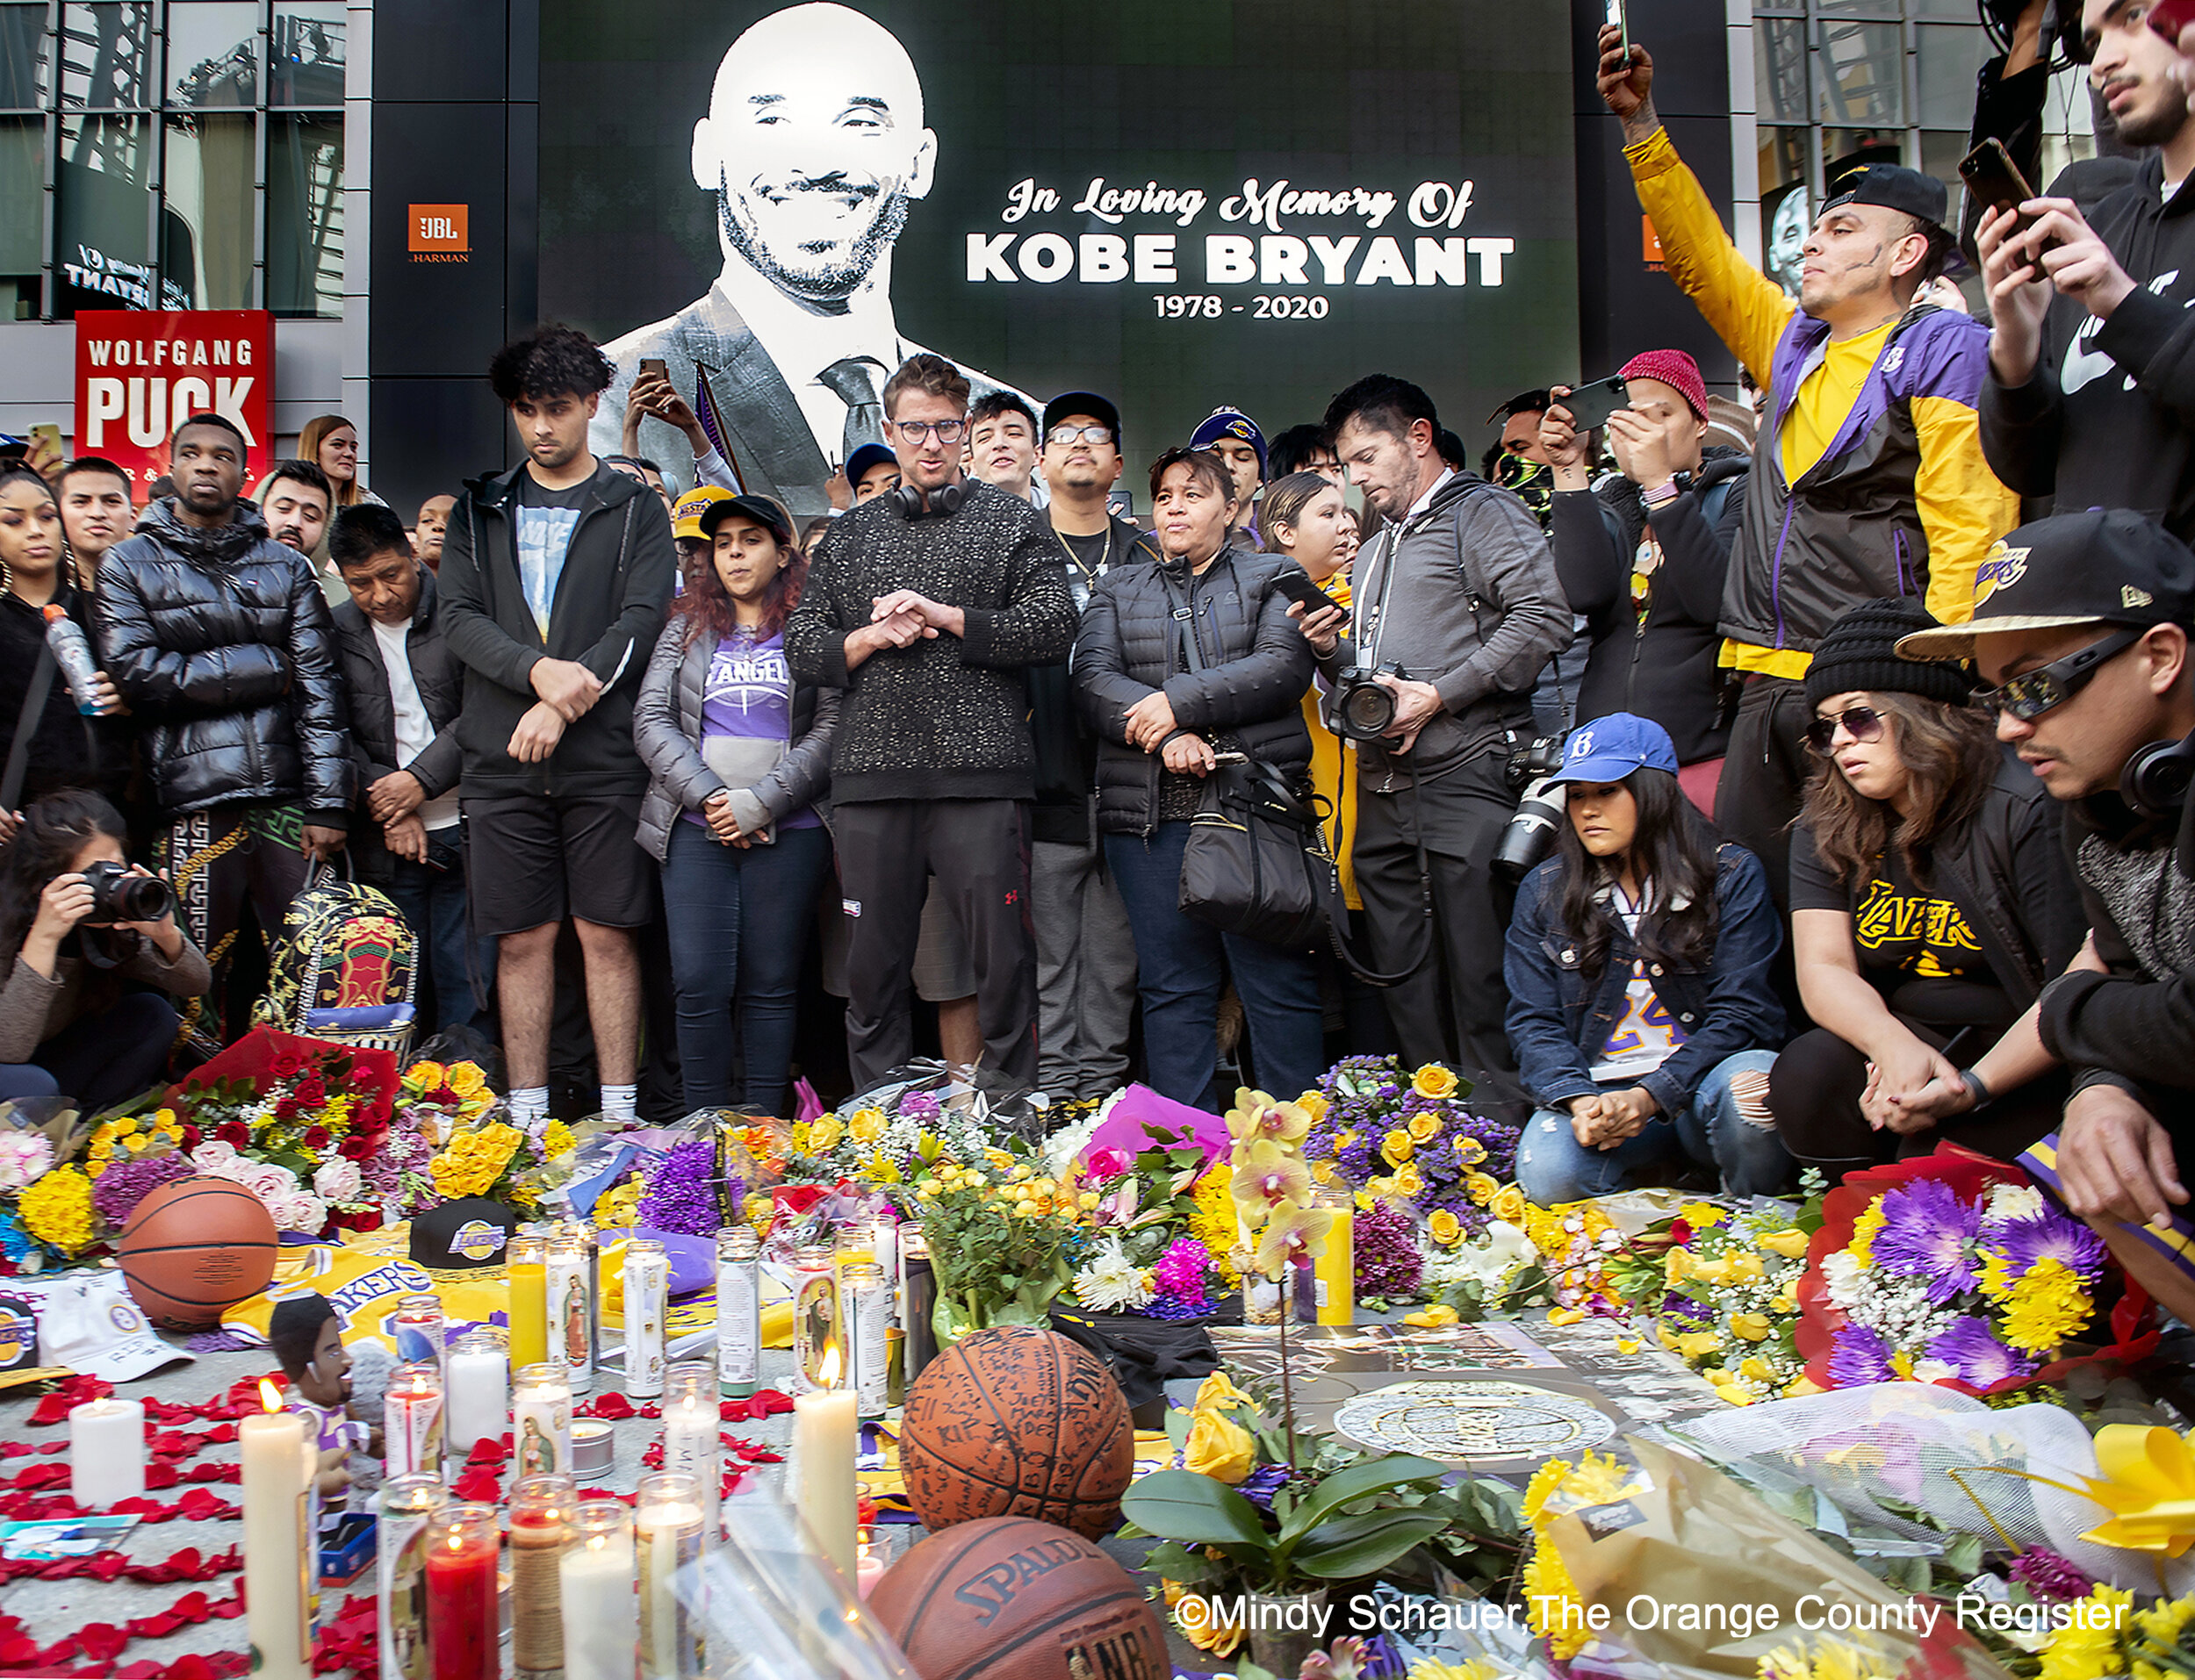  Thousands of Kobe Bryant fans converge outside Staples Center to honor the former Lakers player who died Sunday, January 26, 2020 in a helicopter crash near Calabasas, Calif. He was 41.  